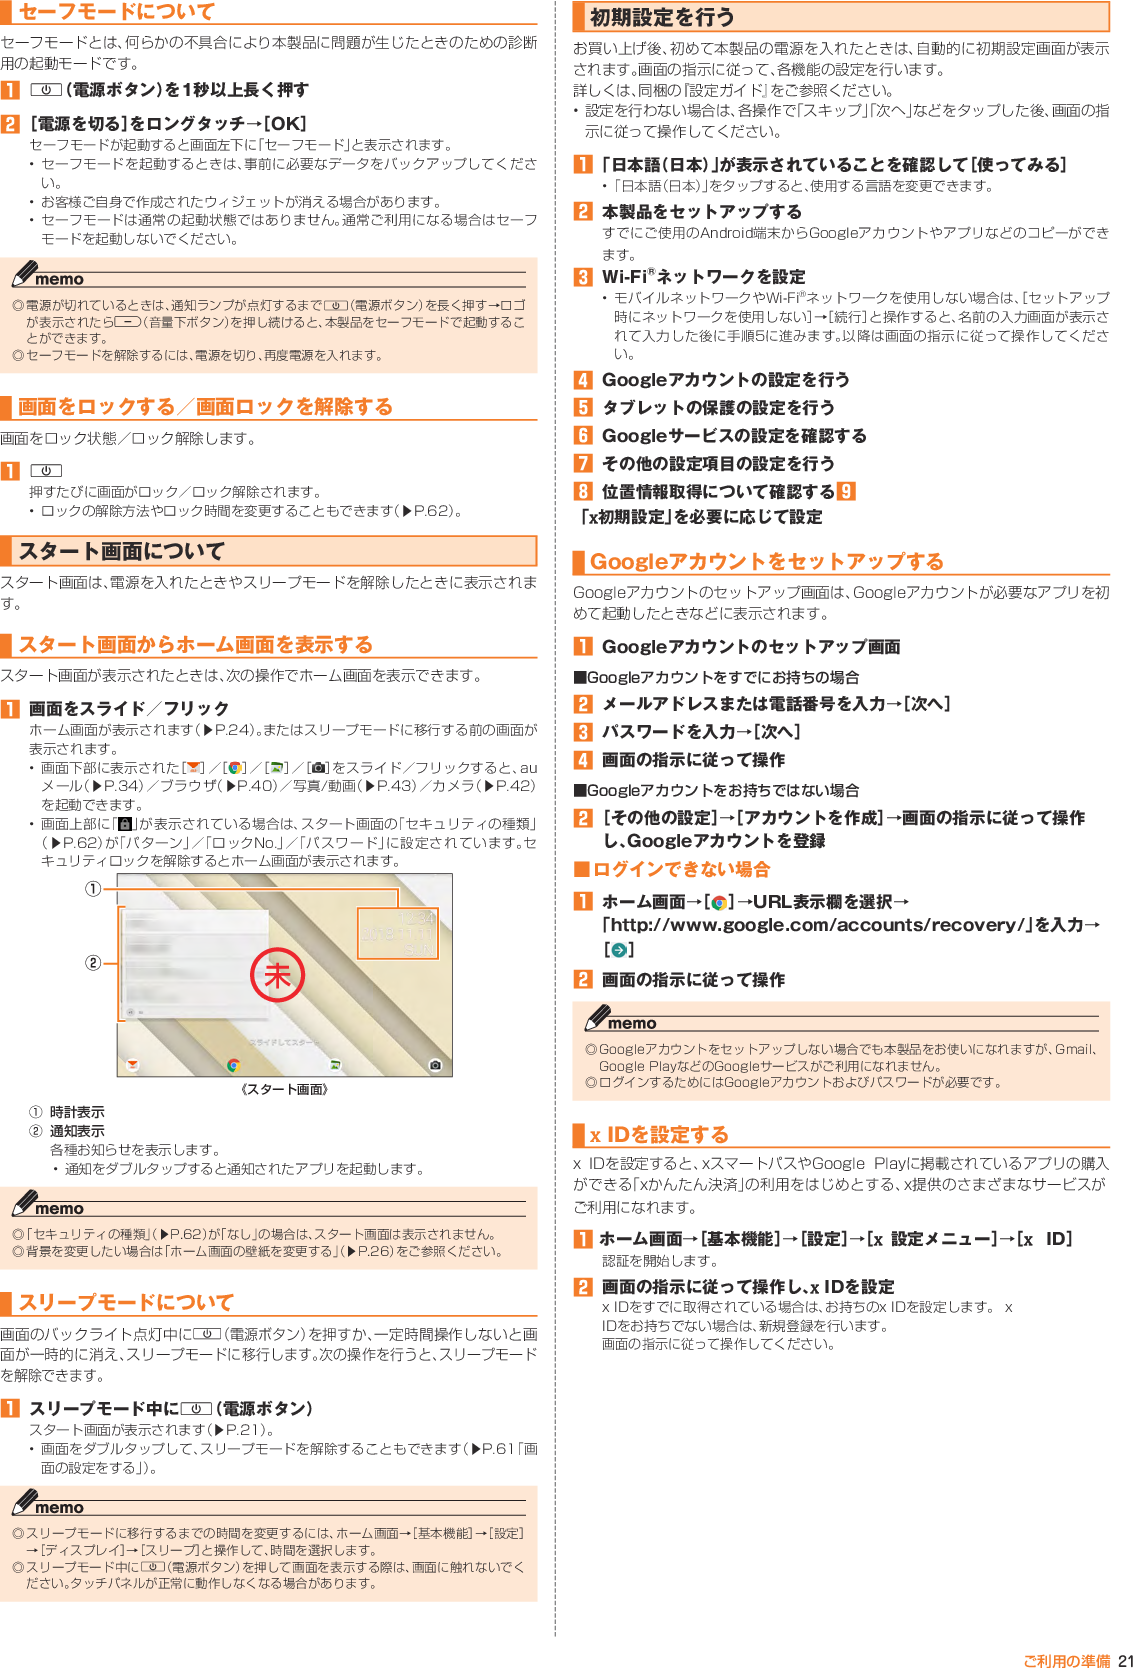 Page 23 of Kyocera FA85 Tablet User Manual 2